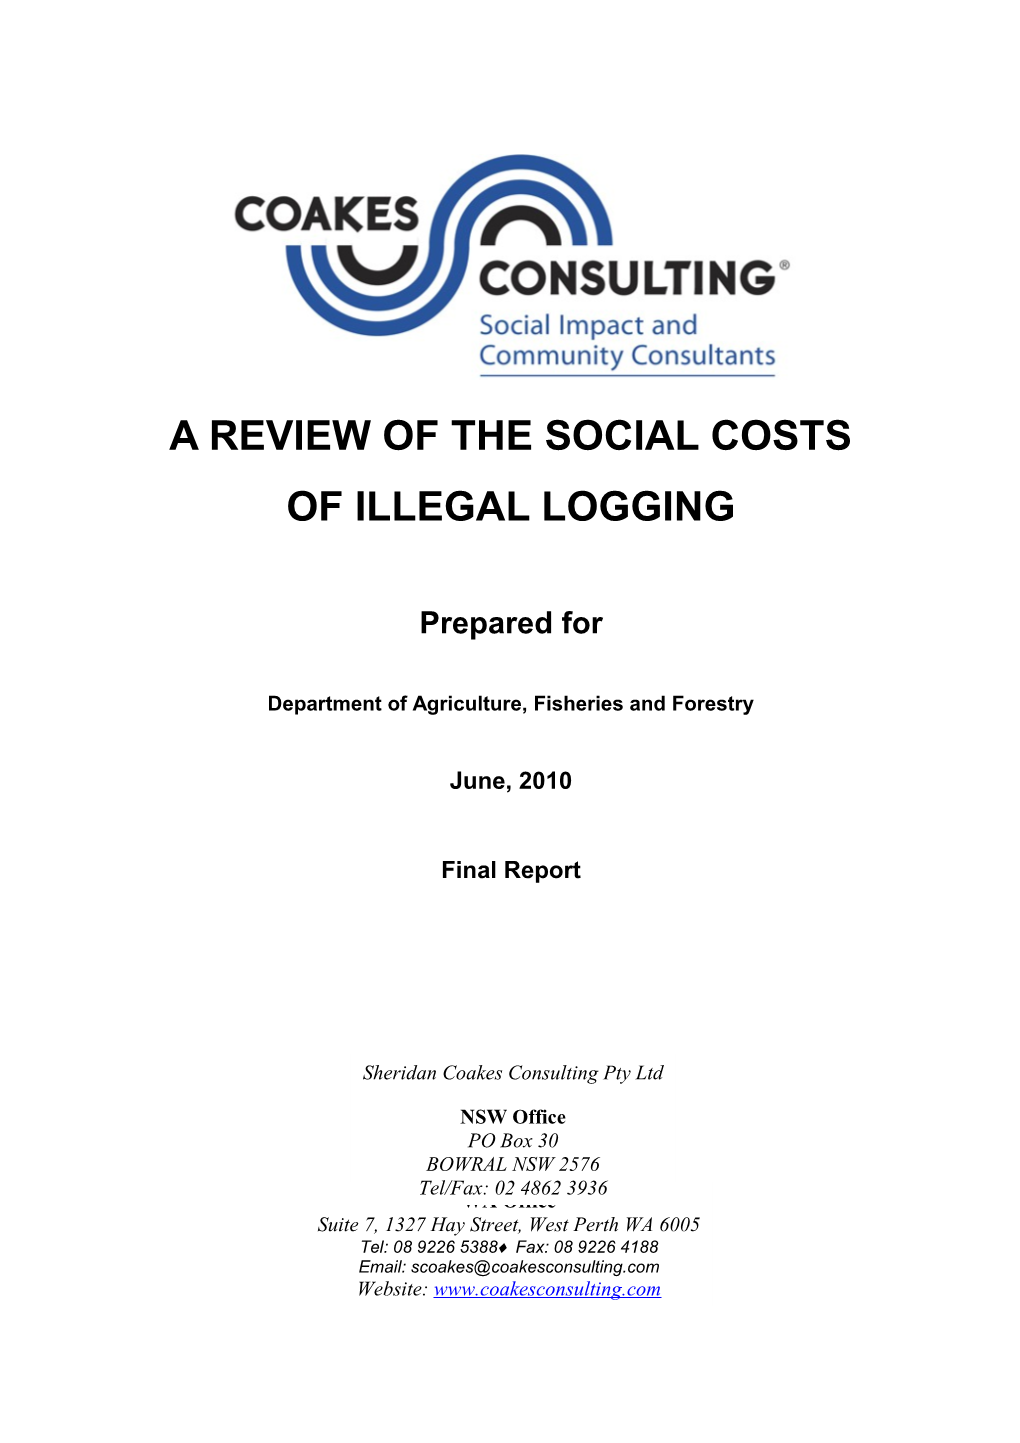 A Review of the Social Costs of Illegal Logging